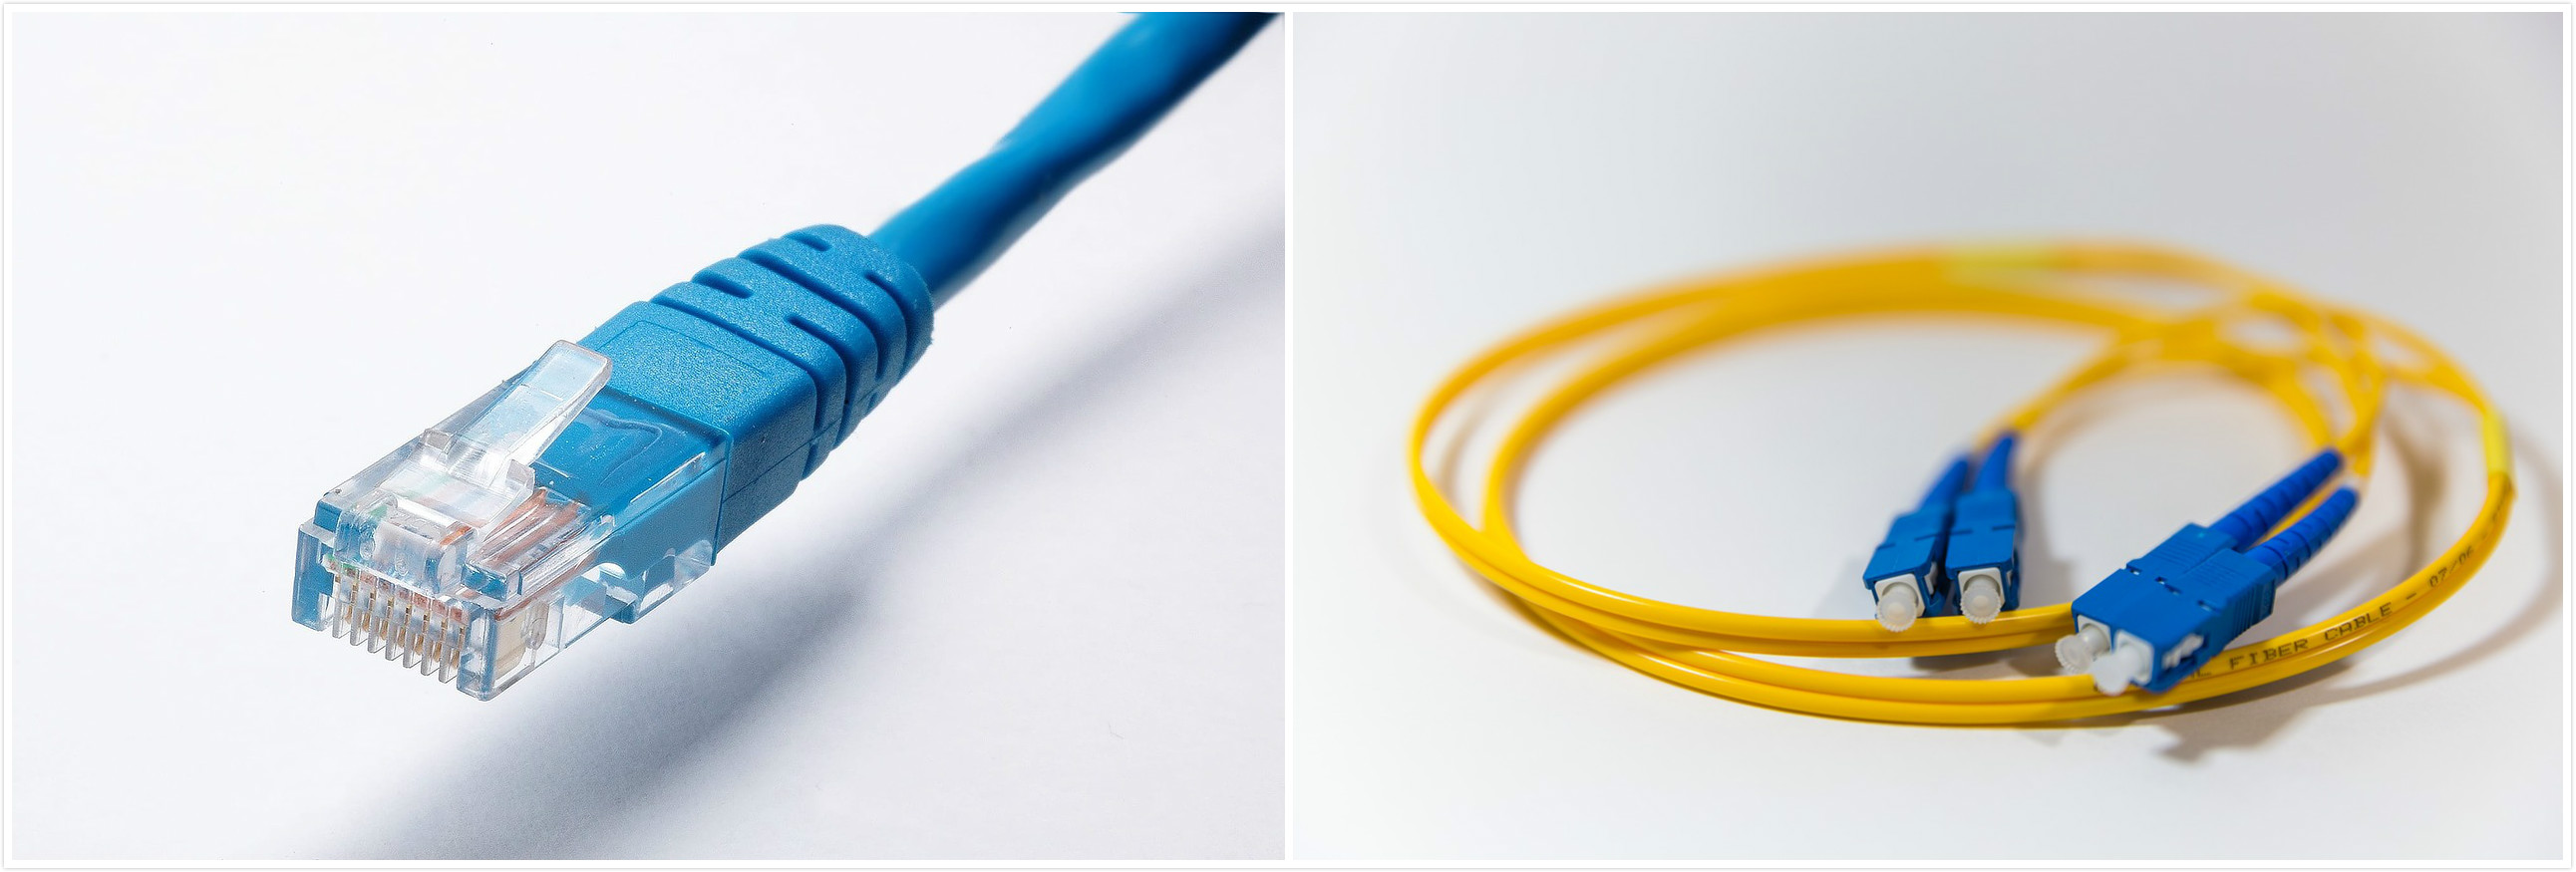 What Are The Differences Between Fiber Optic Cables And Twisted Pair Cables?